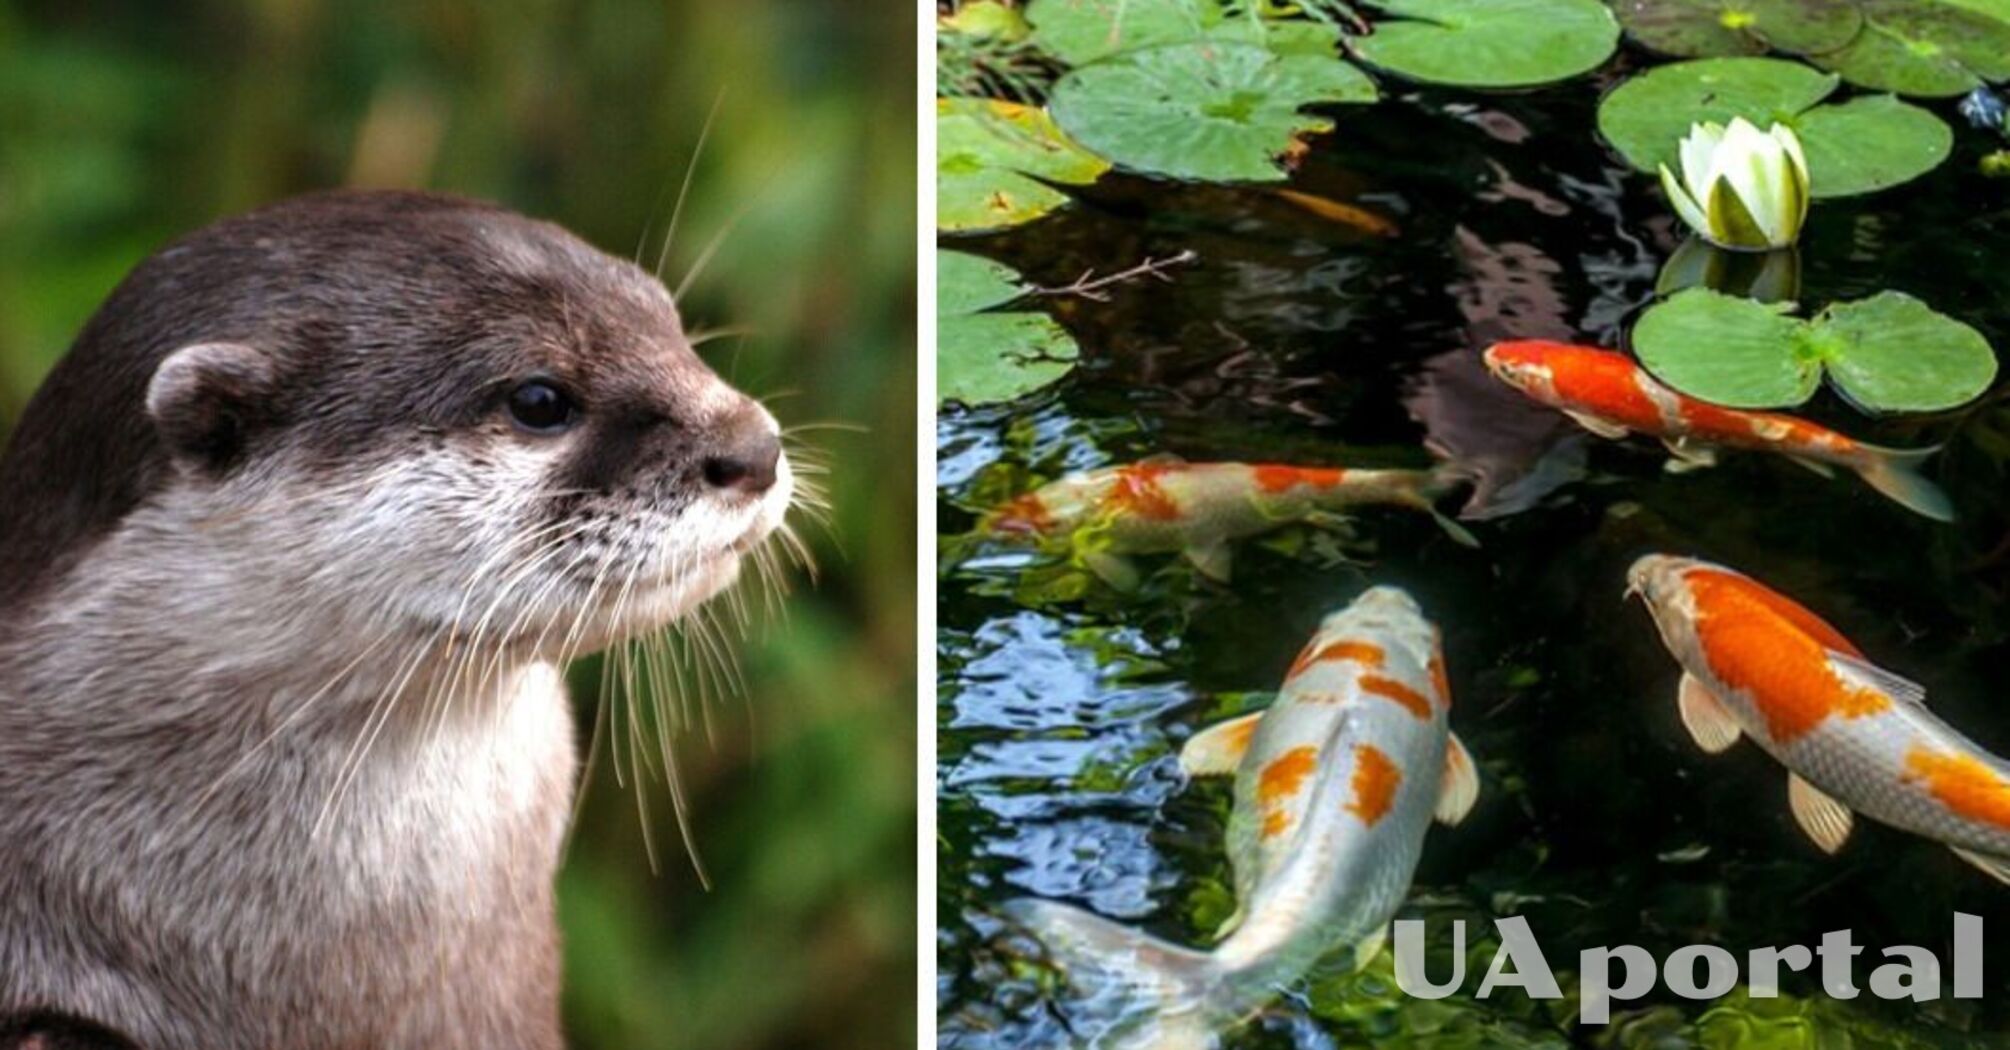 In the UK, an otter robbed an expensive hotel for 126 thousand dollars (video)